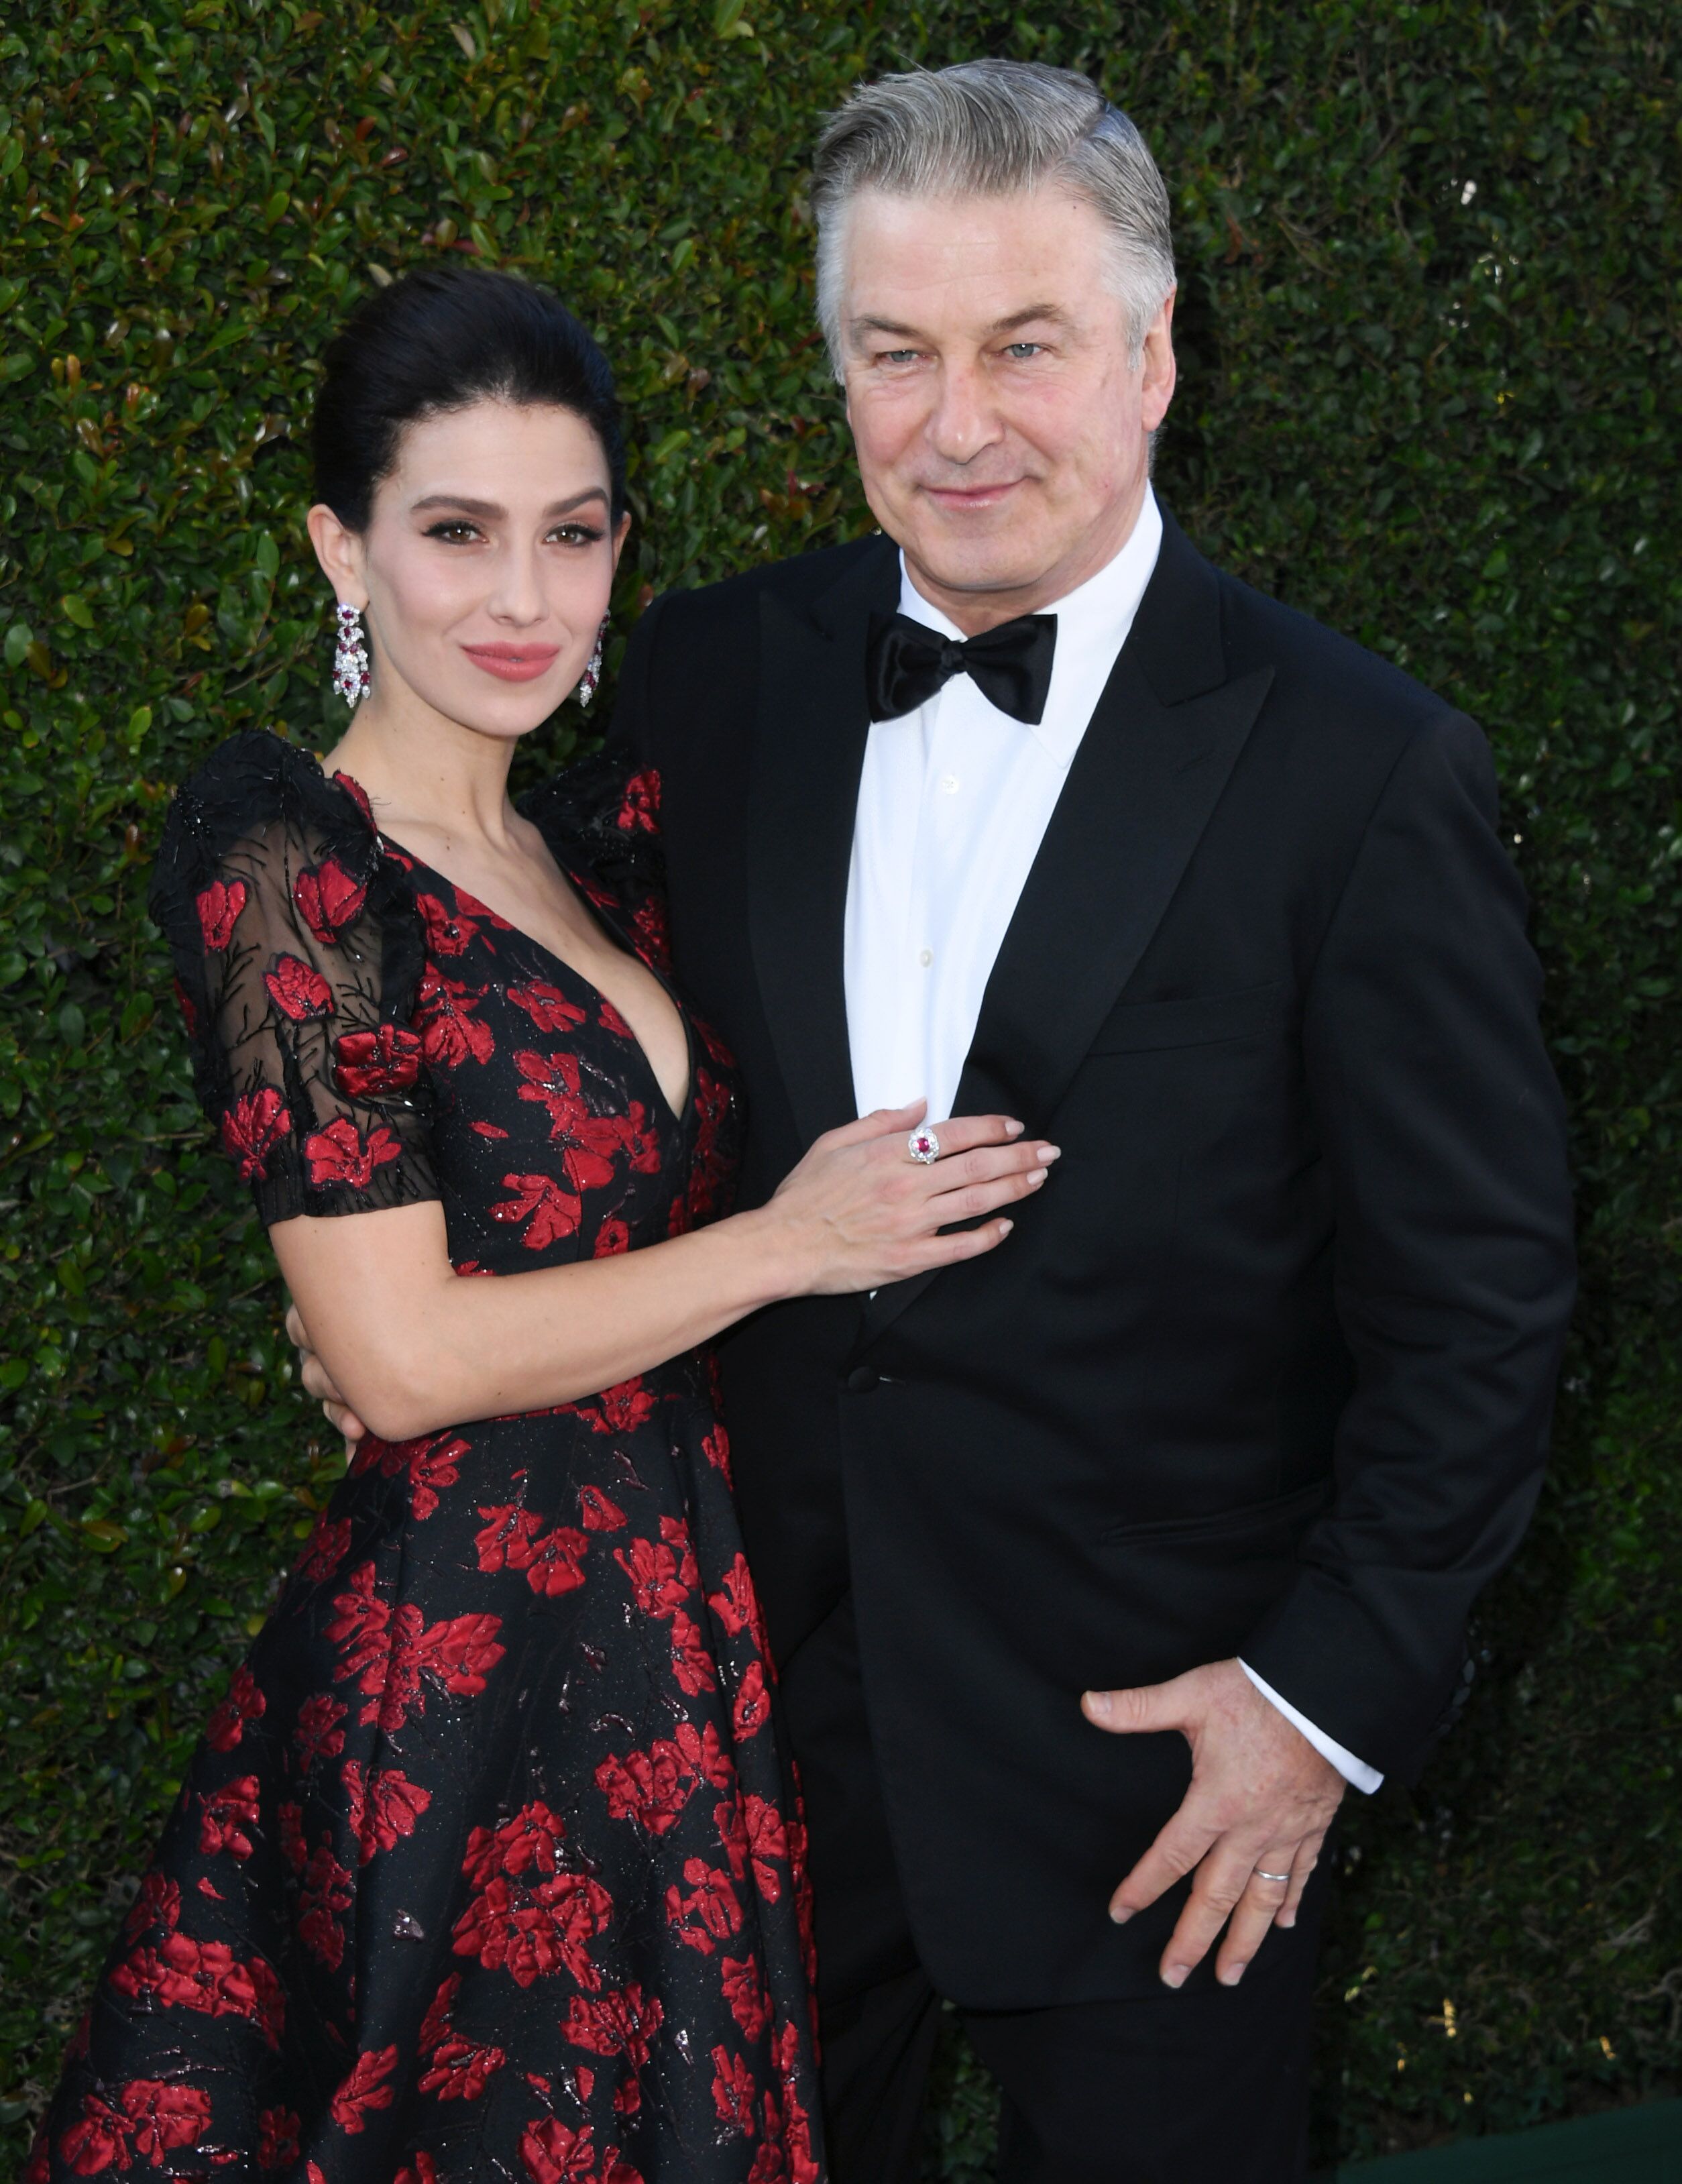 Hilaria Baldwin and Alec Baldwin at the 25th Annual Screen Actors Guild Awards on January 27, 2019. | Source: Getty Images